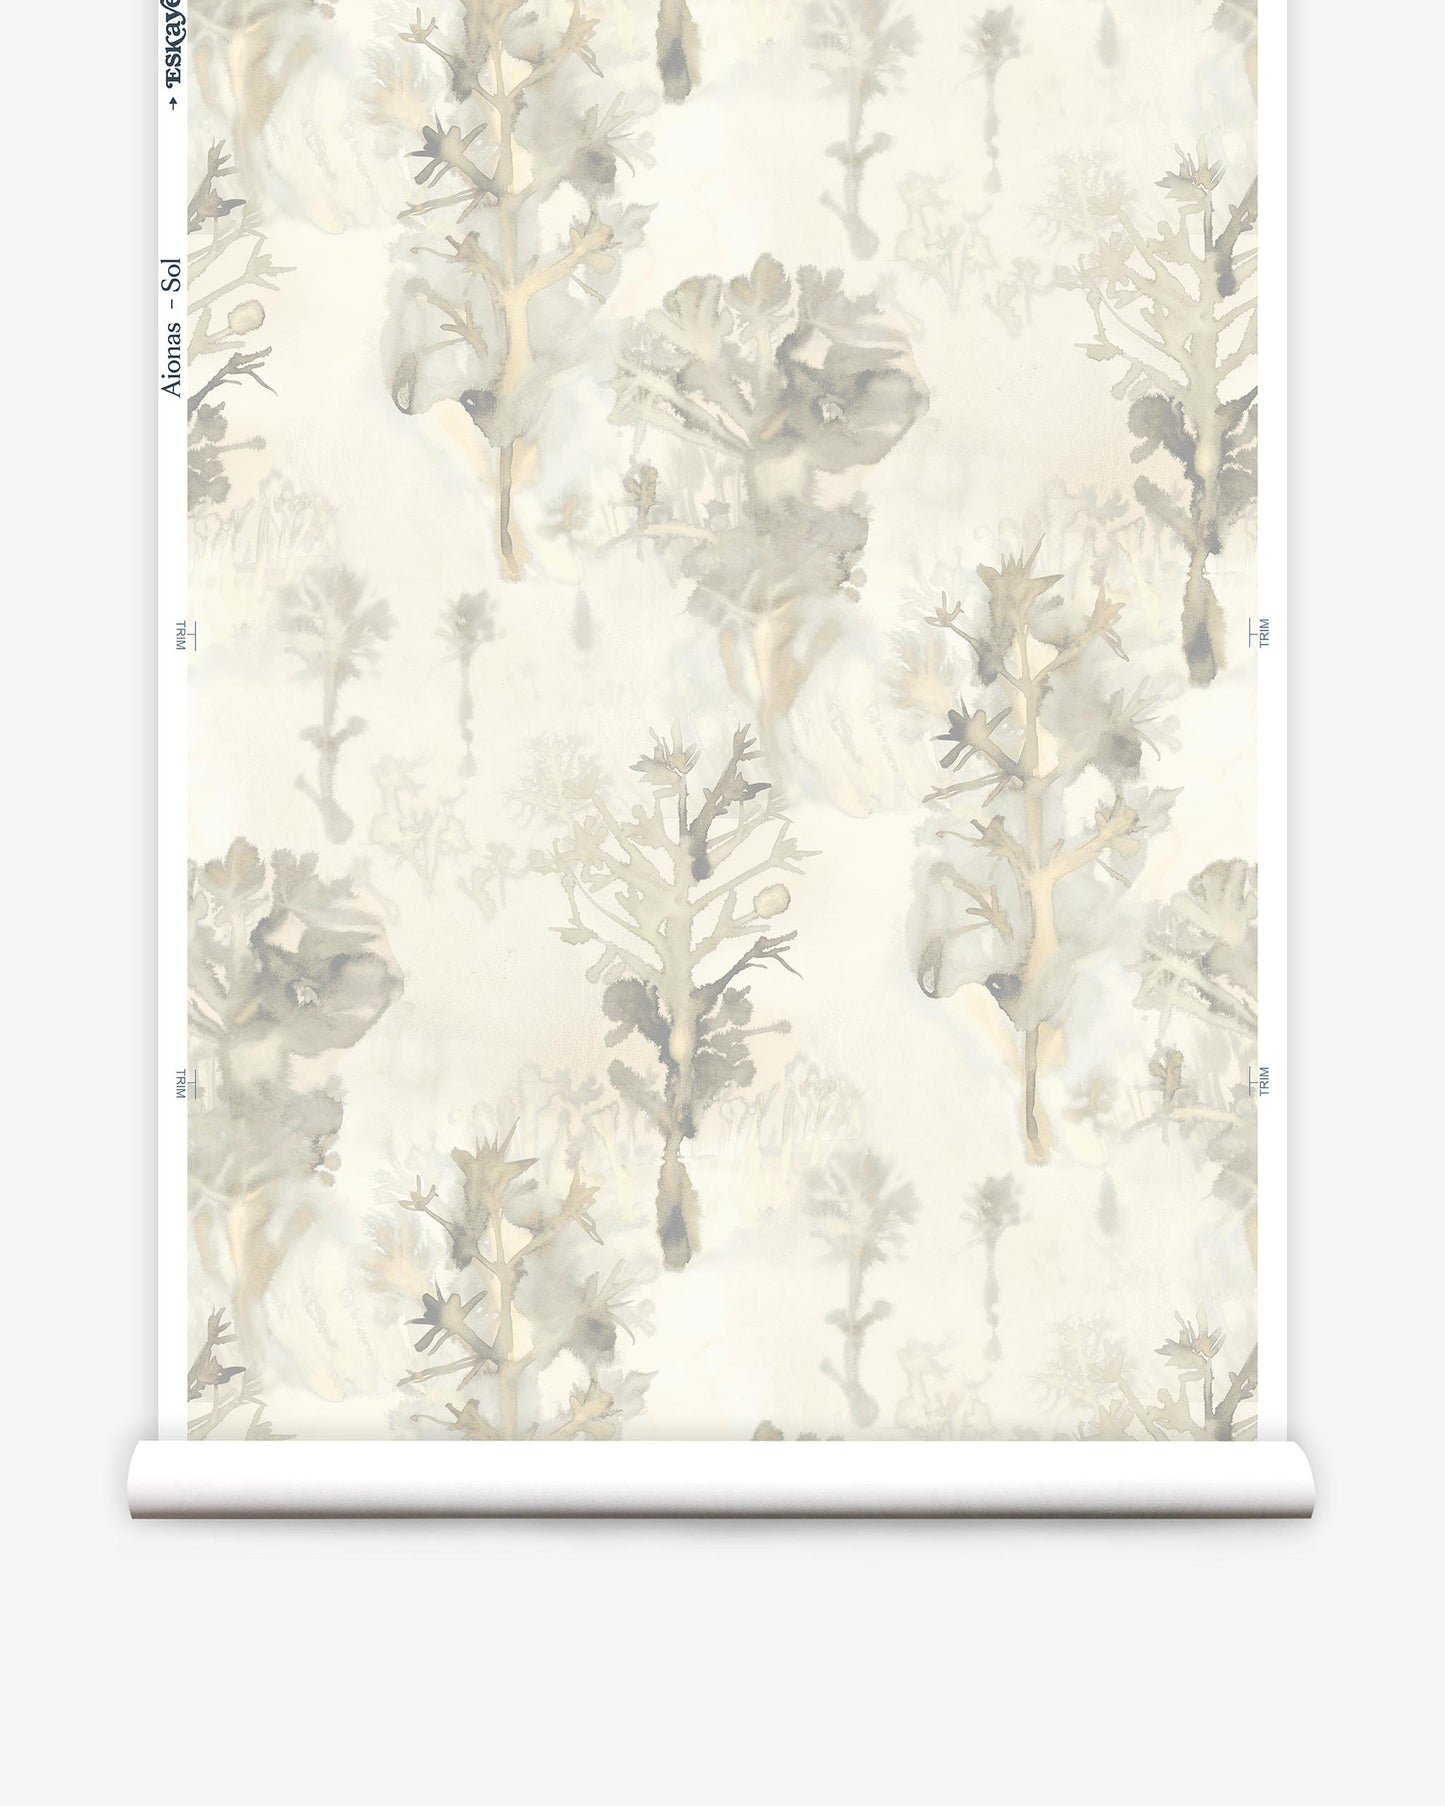 A roll of Aionas Wallpaper Sol with a beige and grey floral pattern